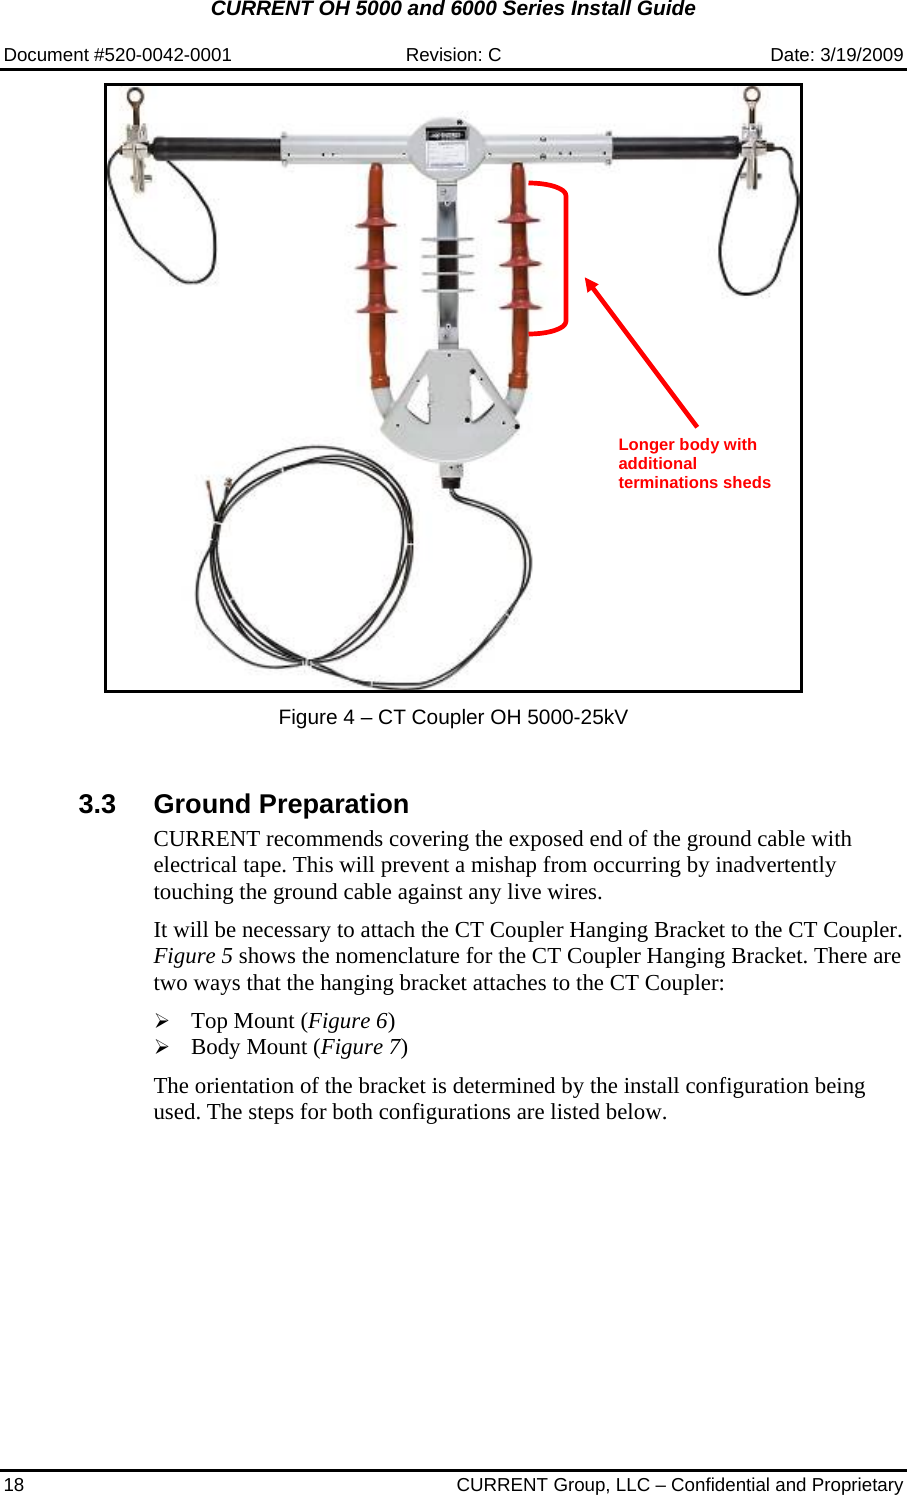 CURRENT OH 5000 and 6000 Series Install Guide  Document #520-0042-0001  Revision: C  Date: 3/19/2009 18  CURRENT Group, LLC – Confidential and Proprietary    Figure 4 – CT Coupler OH 5000-25kV   3.3 Ground Preparation CURRENT recommends covering the exposed end of the ground cable with electrical tape. This will prevent a mishap from occurring by inadvertently touching the ground cable against any live wires.  It will be necessary to attach the CT Coupler Hanging Bracket to the CT Coupler. Figure 5 shows the nomenclature for the CT Coupler Hanging Bracket. There are two ways that the hanging bracket attaches to the CT Coupler:  ¾ Top Mount (Figure 6) ¾ Body Mount (Figure 7)  The orientation of the bracket is determined by the install configuration being used. The steps for both configurations are listed below.   Longer body with additional terminations sheds 